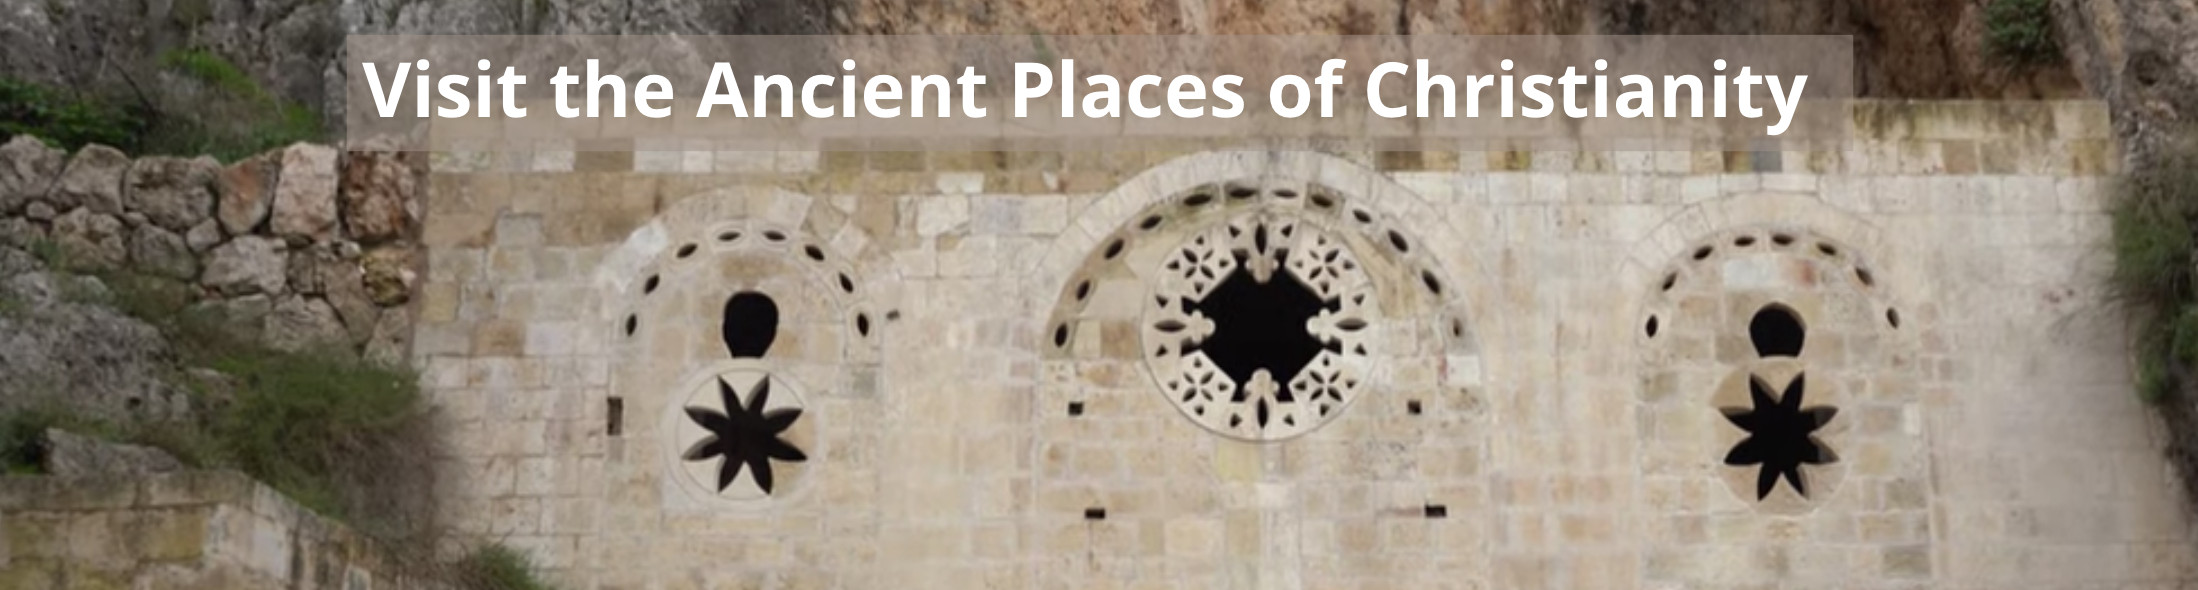 Ancient Places of Christian Banner